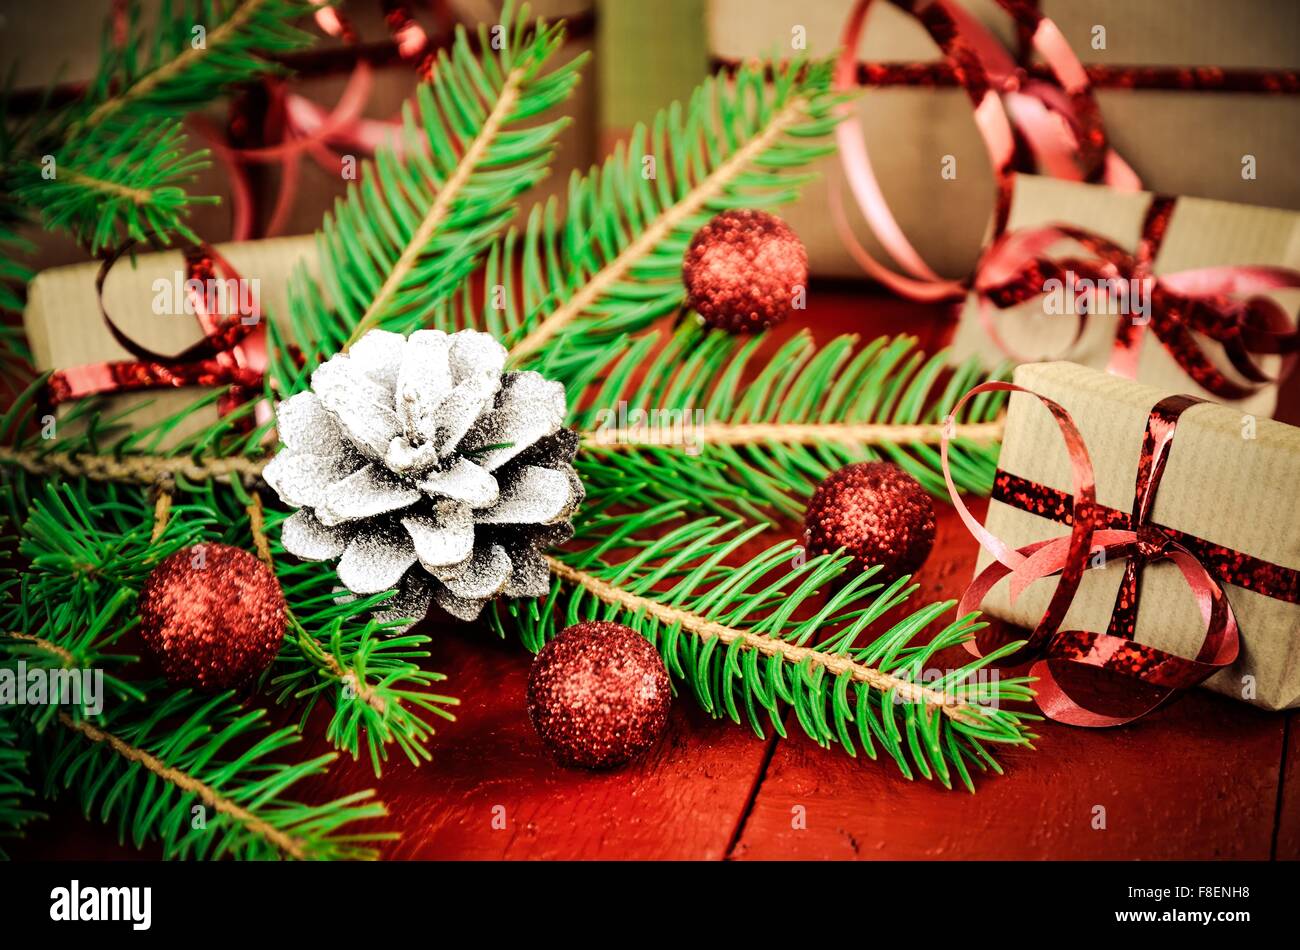 Christmas decoration and gifts. Christmas tree, pine cone, baubles and gifts in the background. Shallow depth of field. Stock Photo